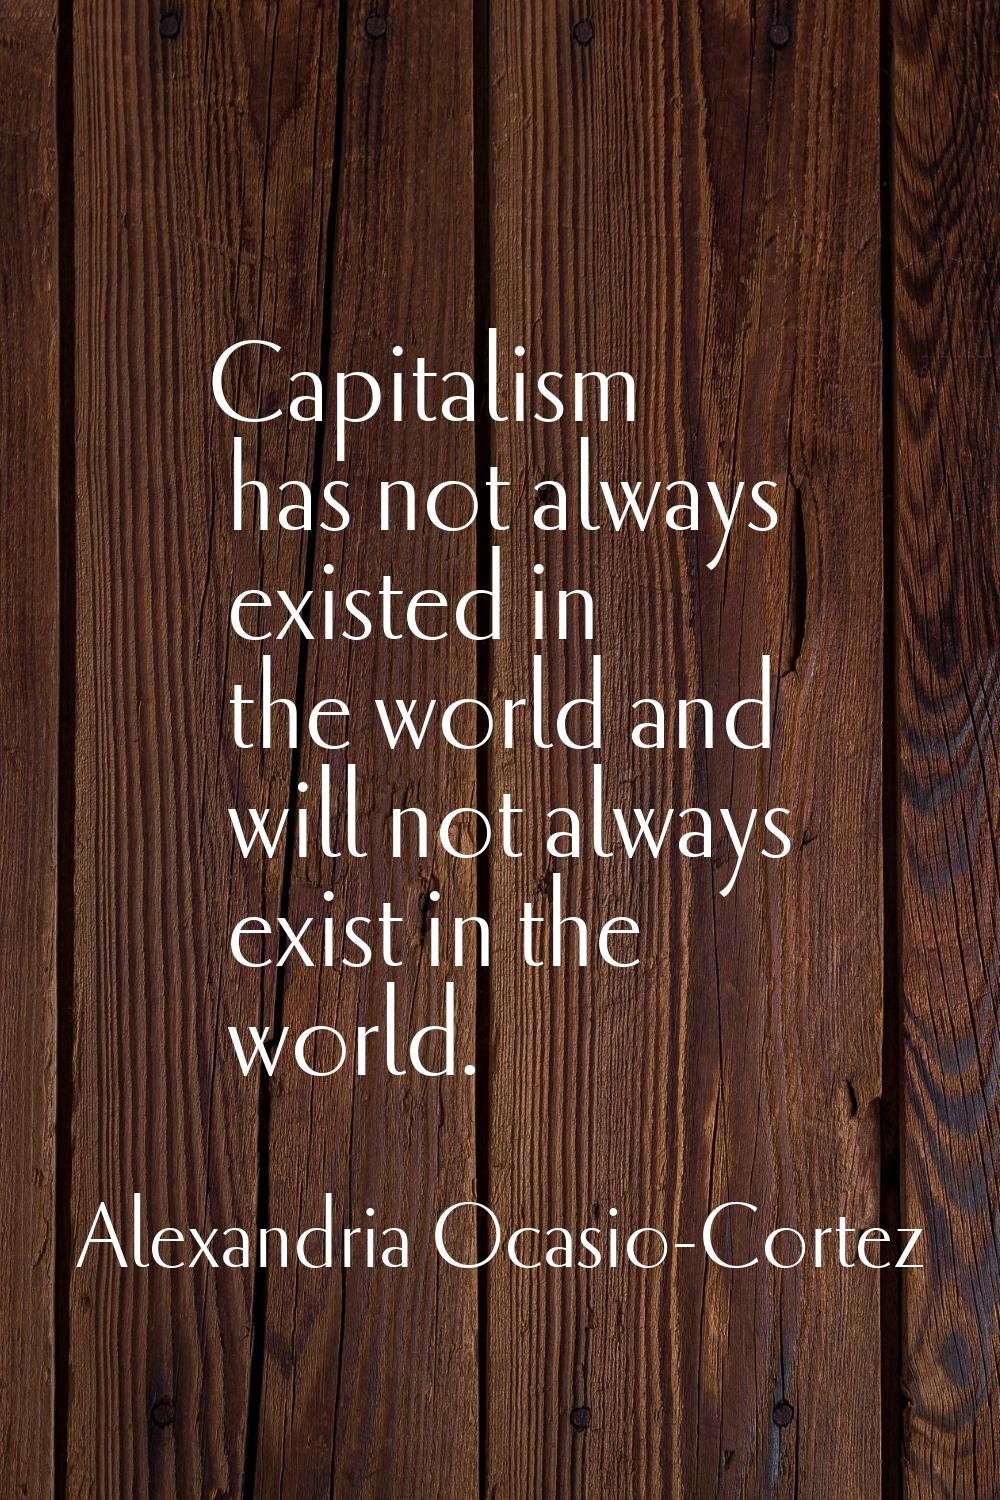 Capitalism has not always existed in the world and will not always exist in the world.